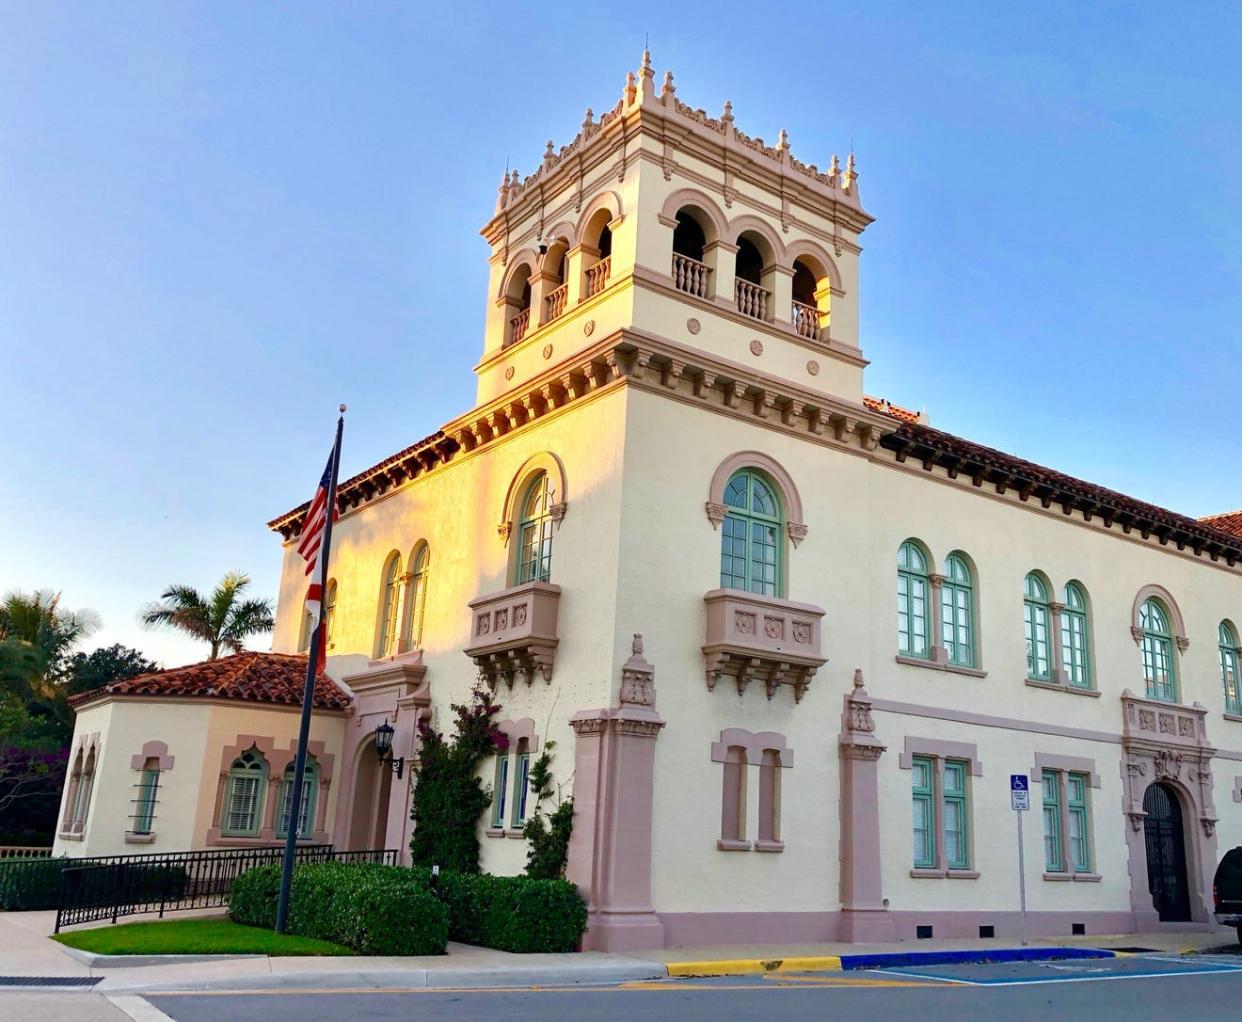 The Town is seeking applicants for openings on its Landmarks Preservation Commission, Architectural Commission, Retirement Board of Trustees and Code Enforcement boards.